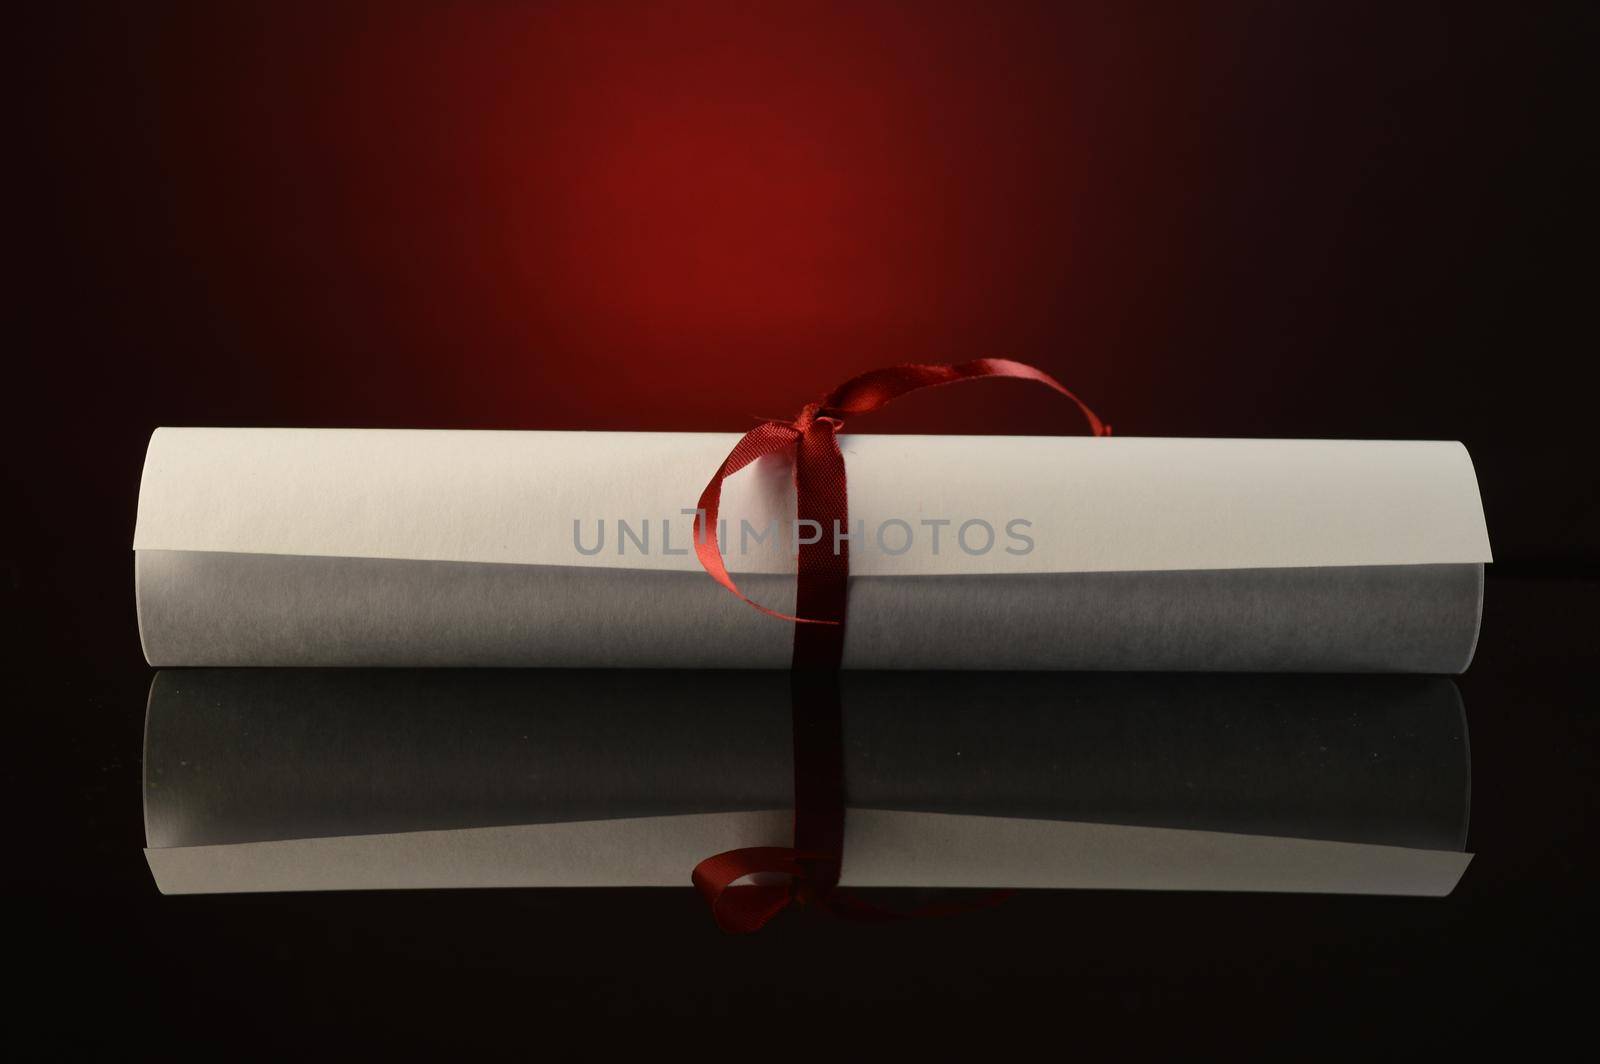 A successful graduation diploma tied in a red ribbon over an atmospheric background.